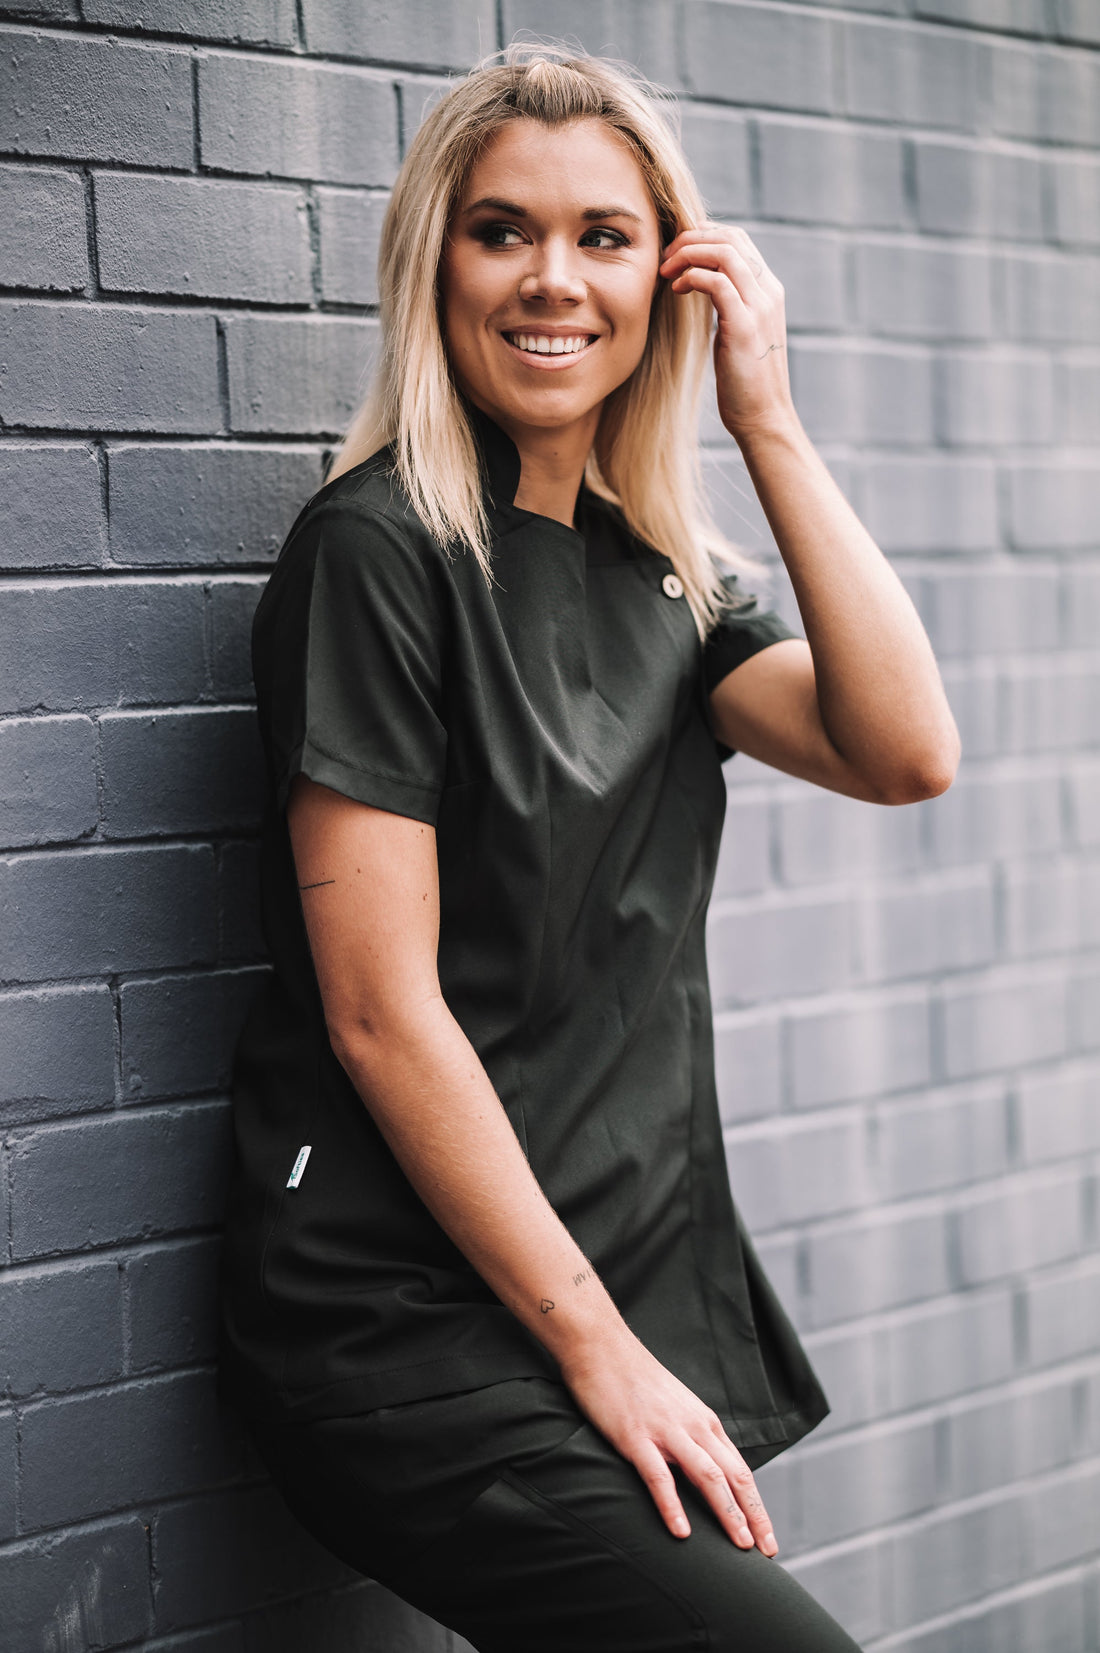 Black scrubs are a stylish and professional choice in healthcare